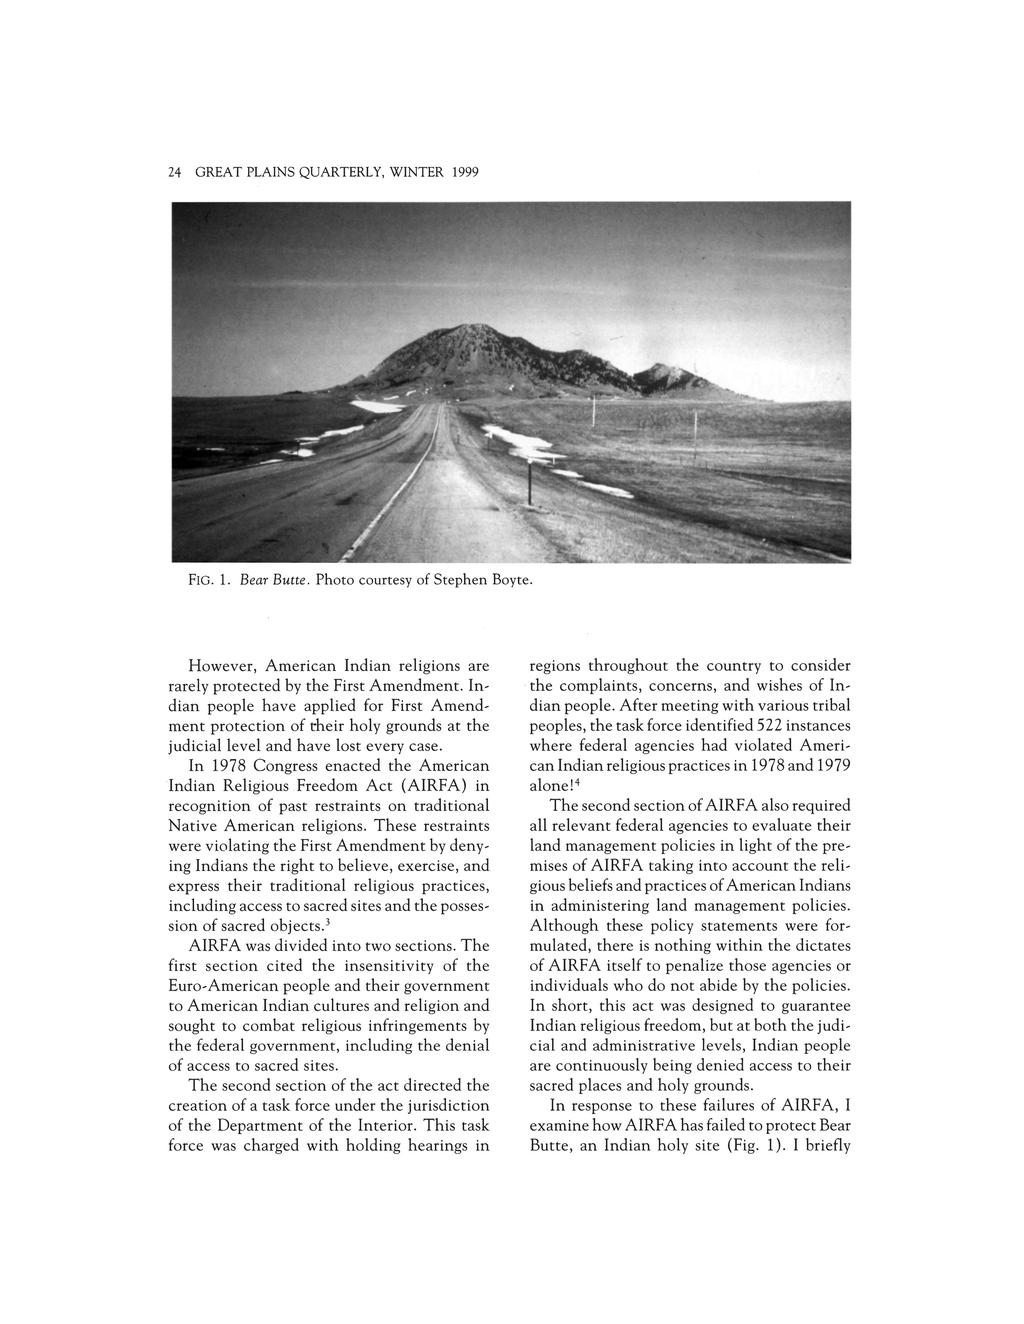 24 GREAT PLAINS QUARTERLY, WINTER 1999 FIG. 1. Bear Butte. Photo courtesy of Stephen Boyte. However, American Indian religions are rarely protected by the First Amendment.